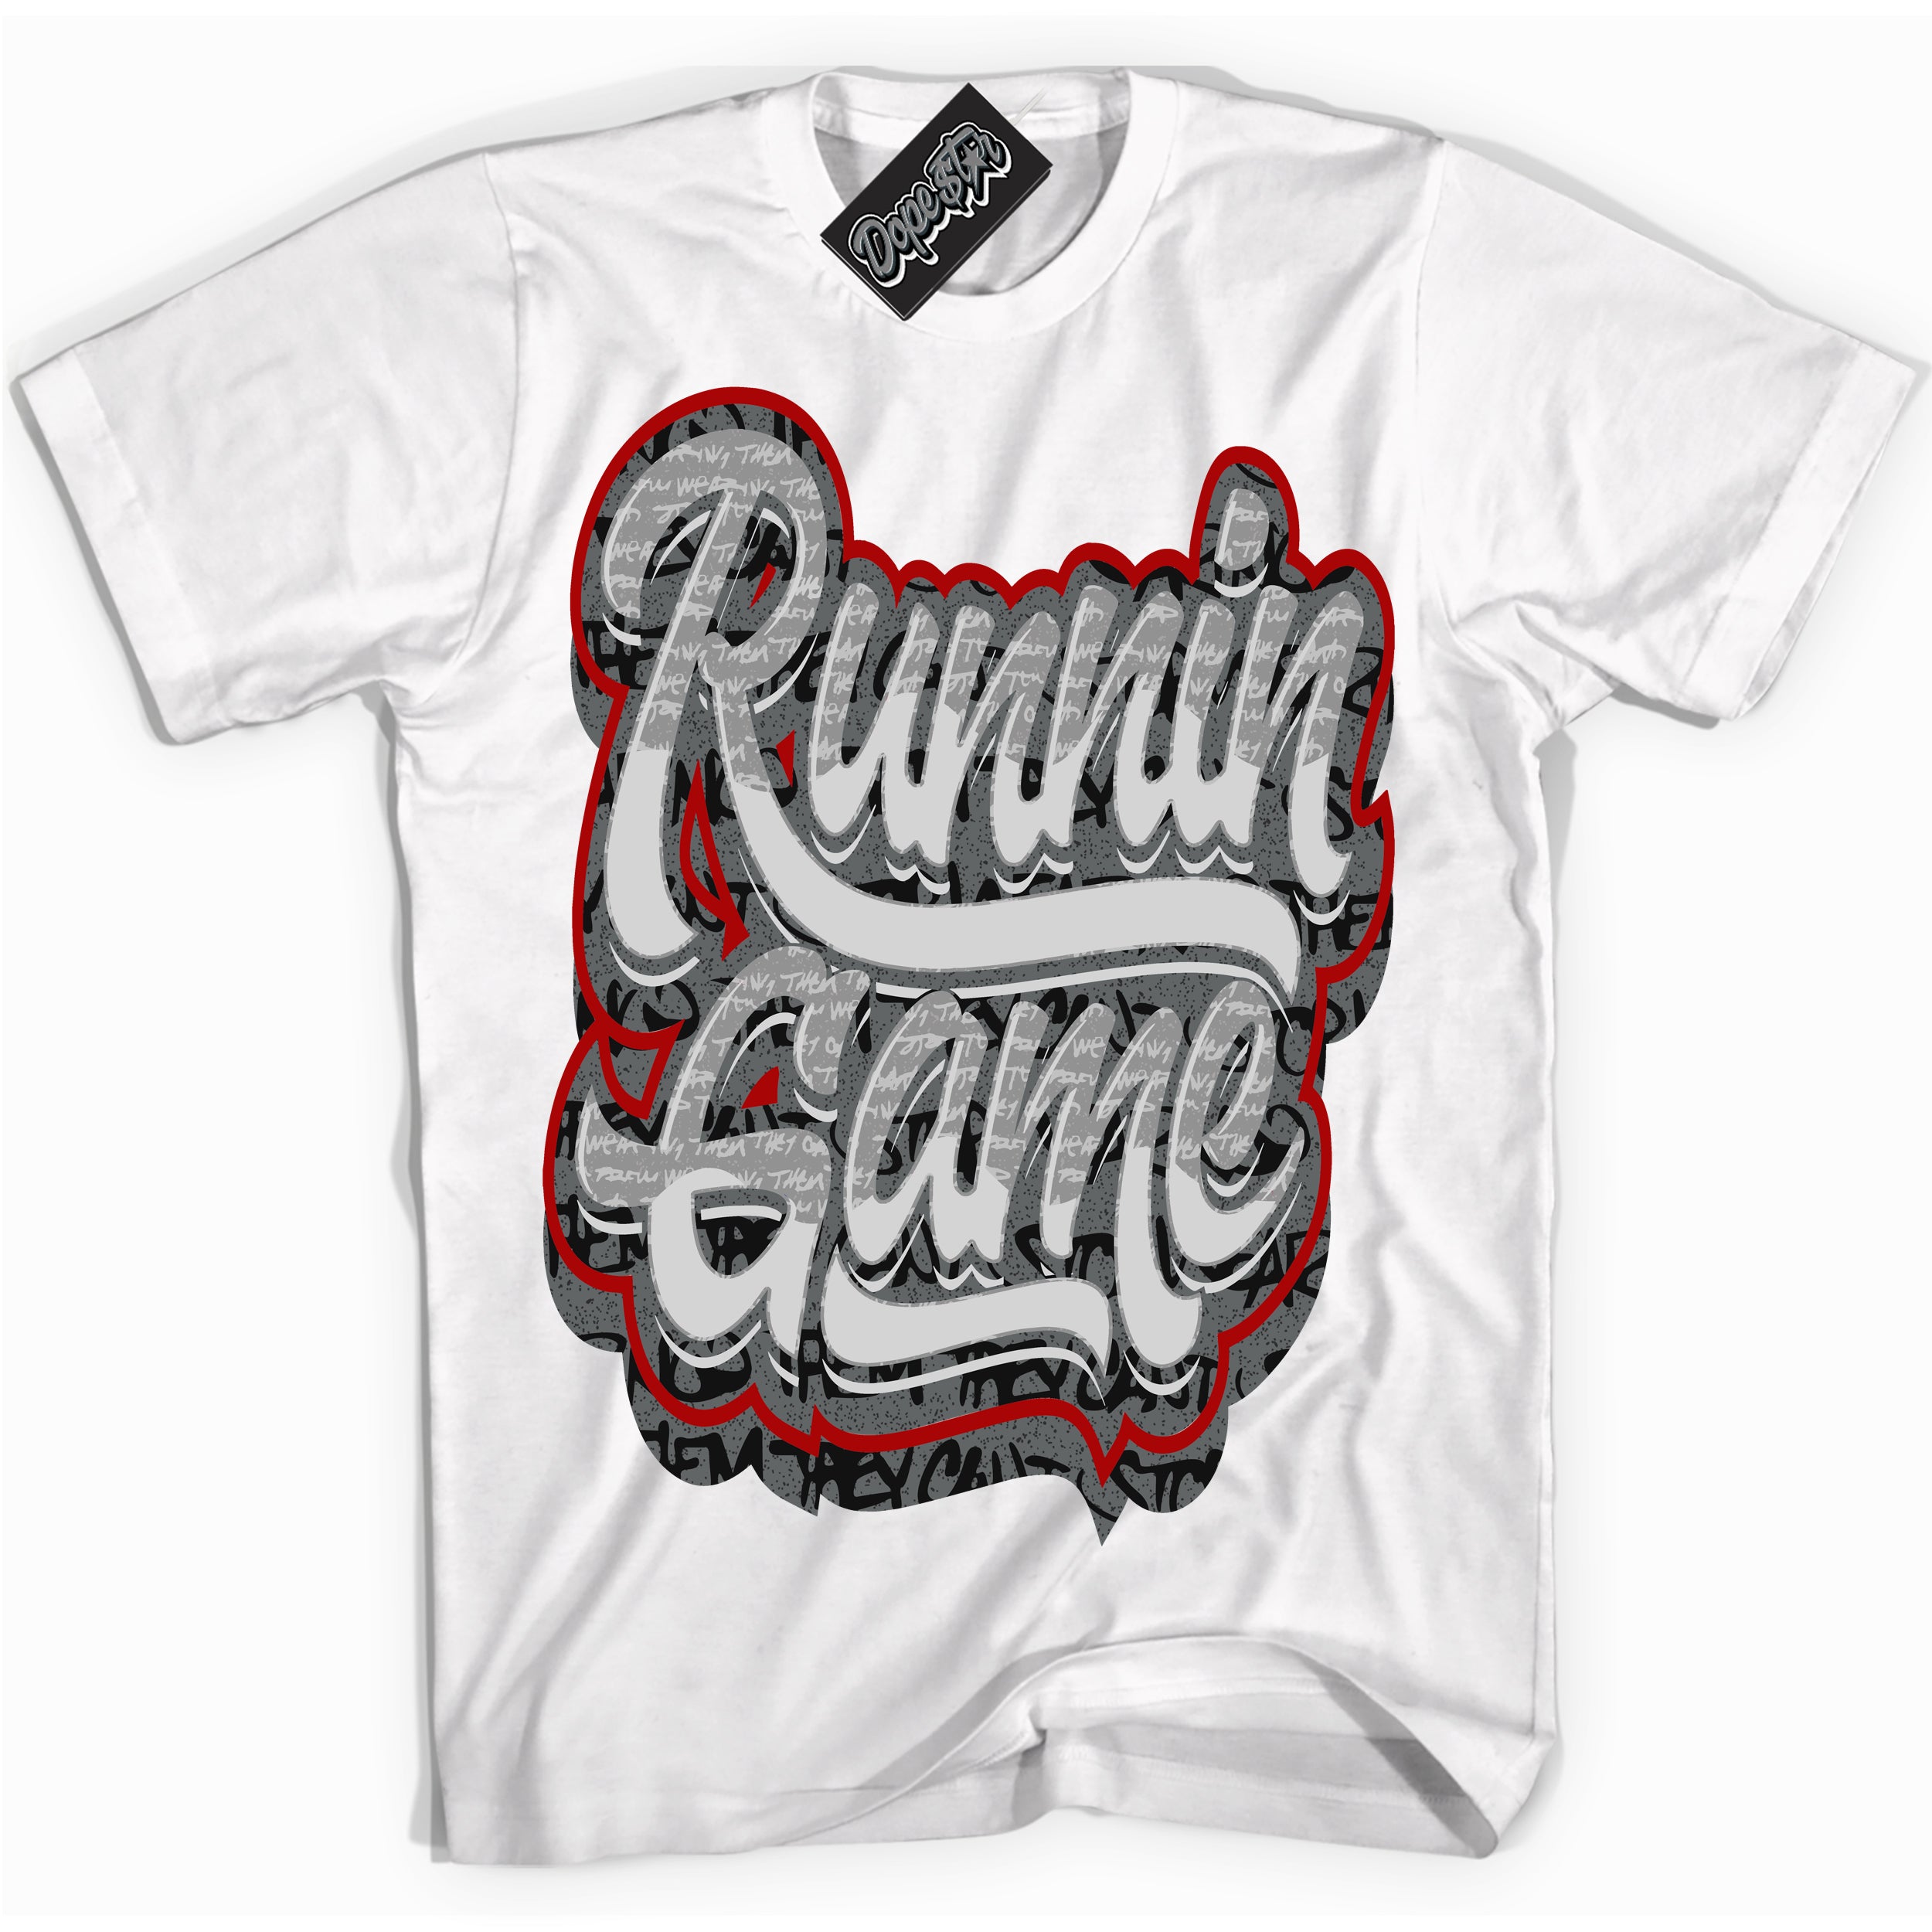 Cool White Shirt with “ Running Game ” design that perfectly matches Rebellionaire 1s Sneakers.